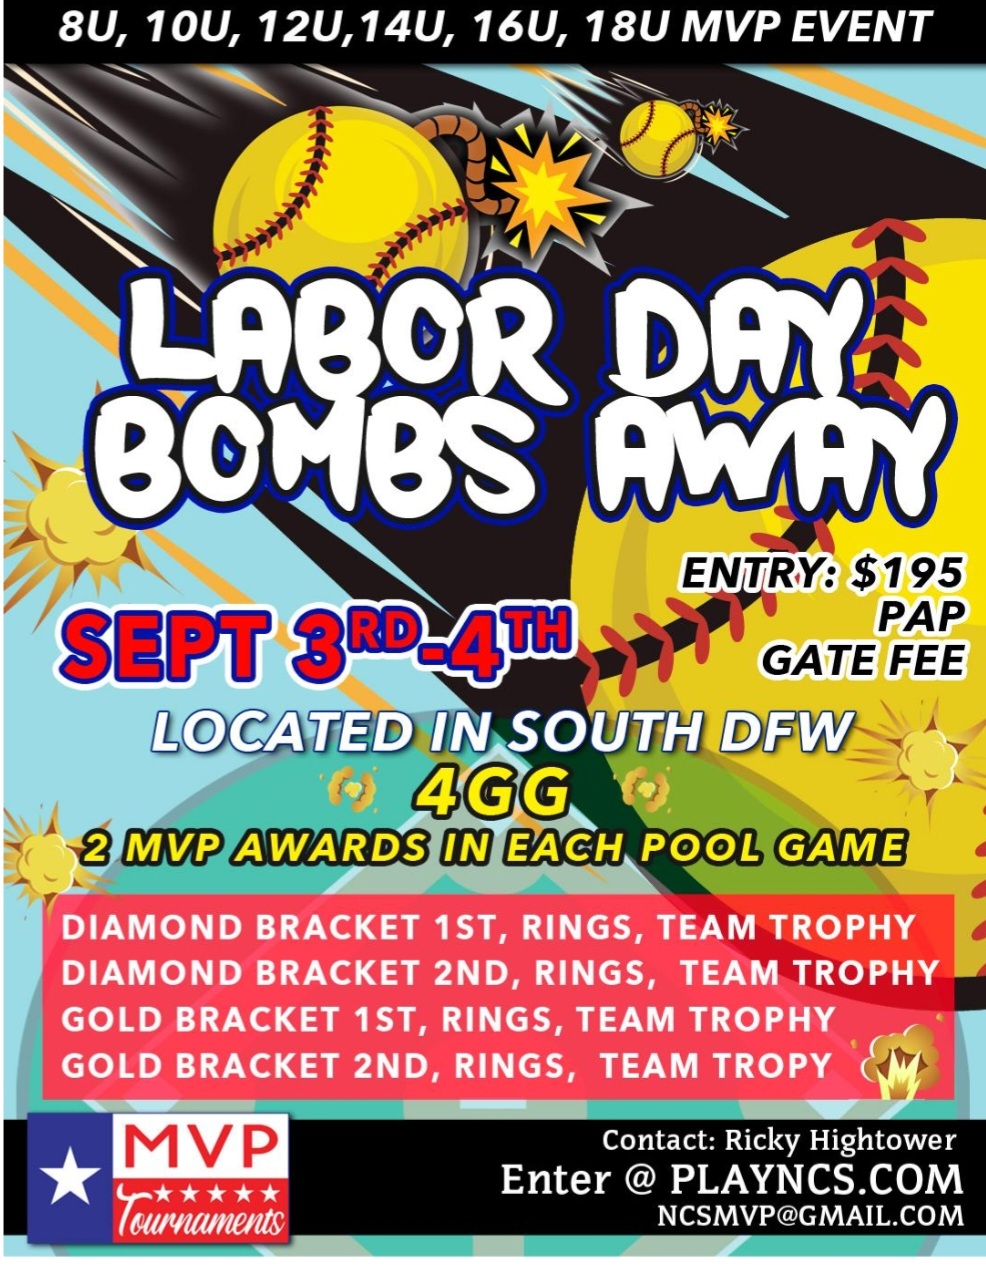 NCS LABOR DAY BOMBS AWAY MVP EVENT Logo